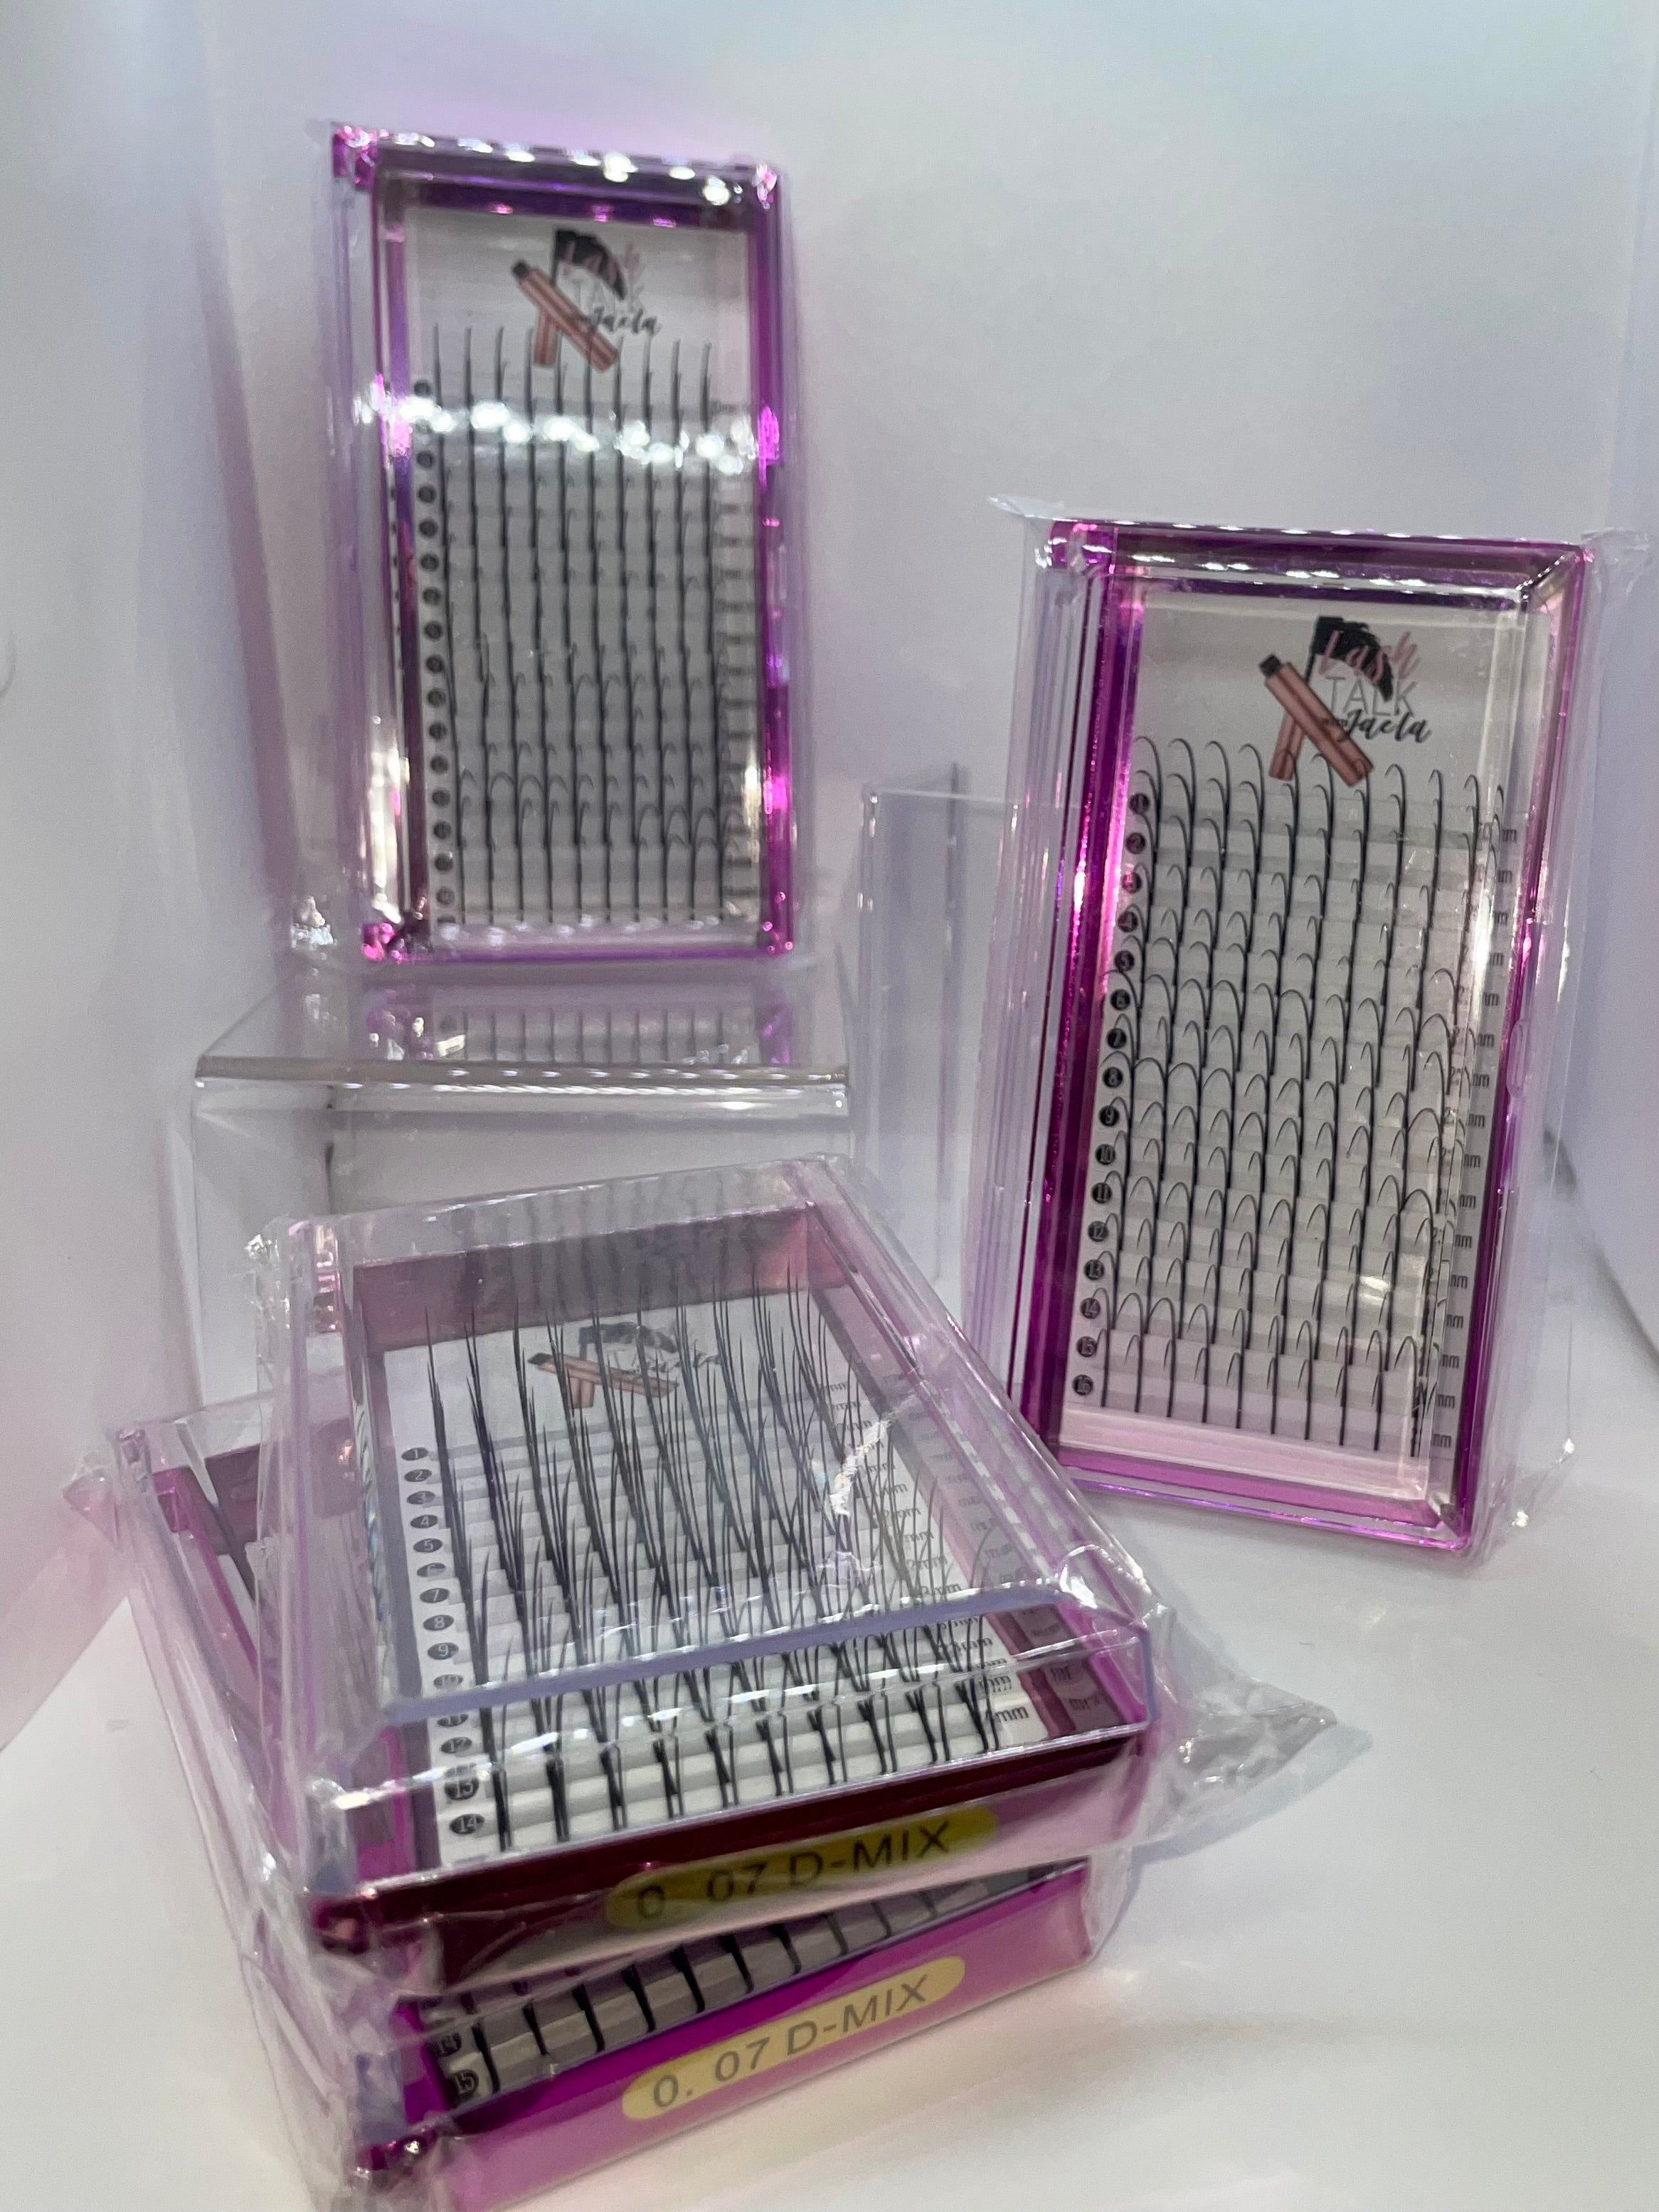 Spike lashes mix 20-24mm